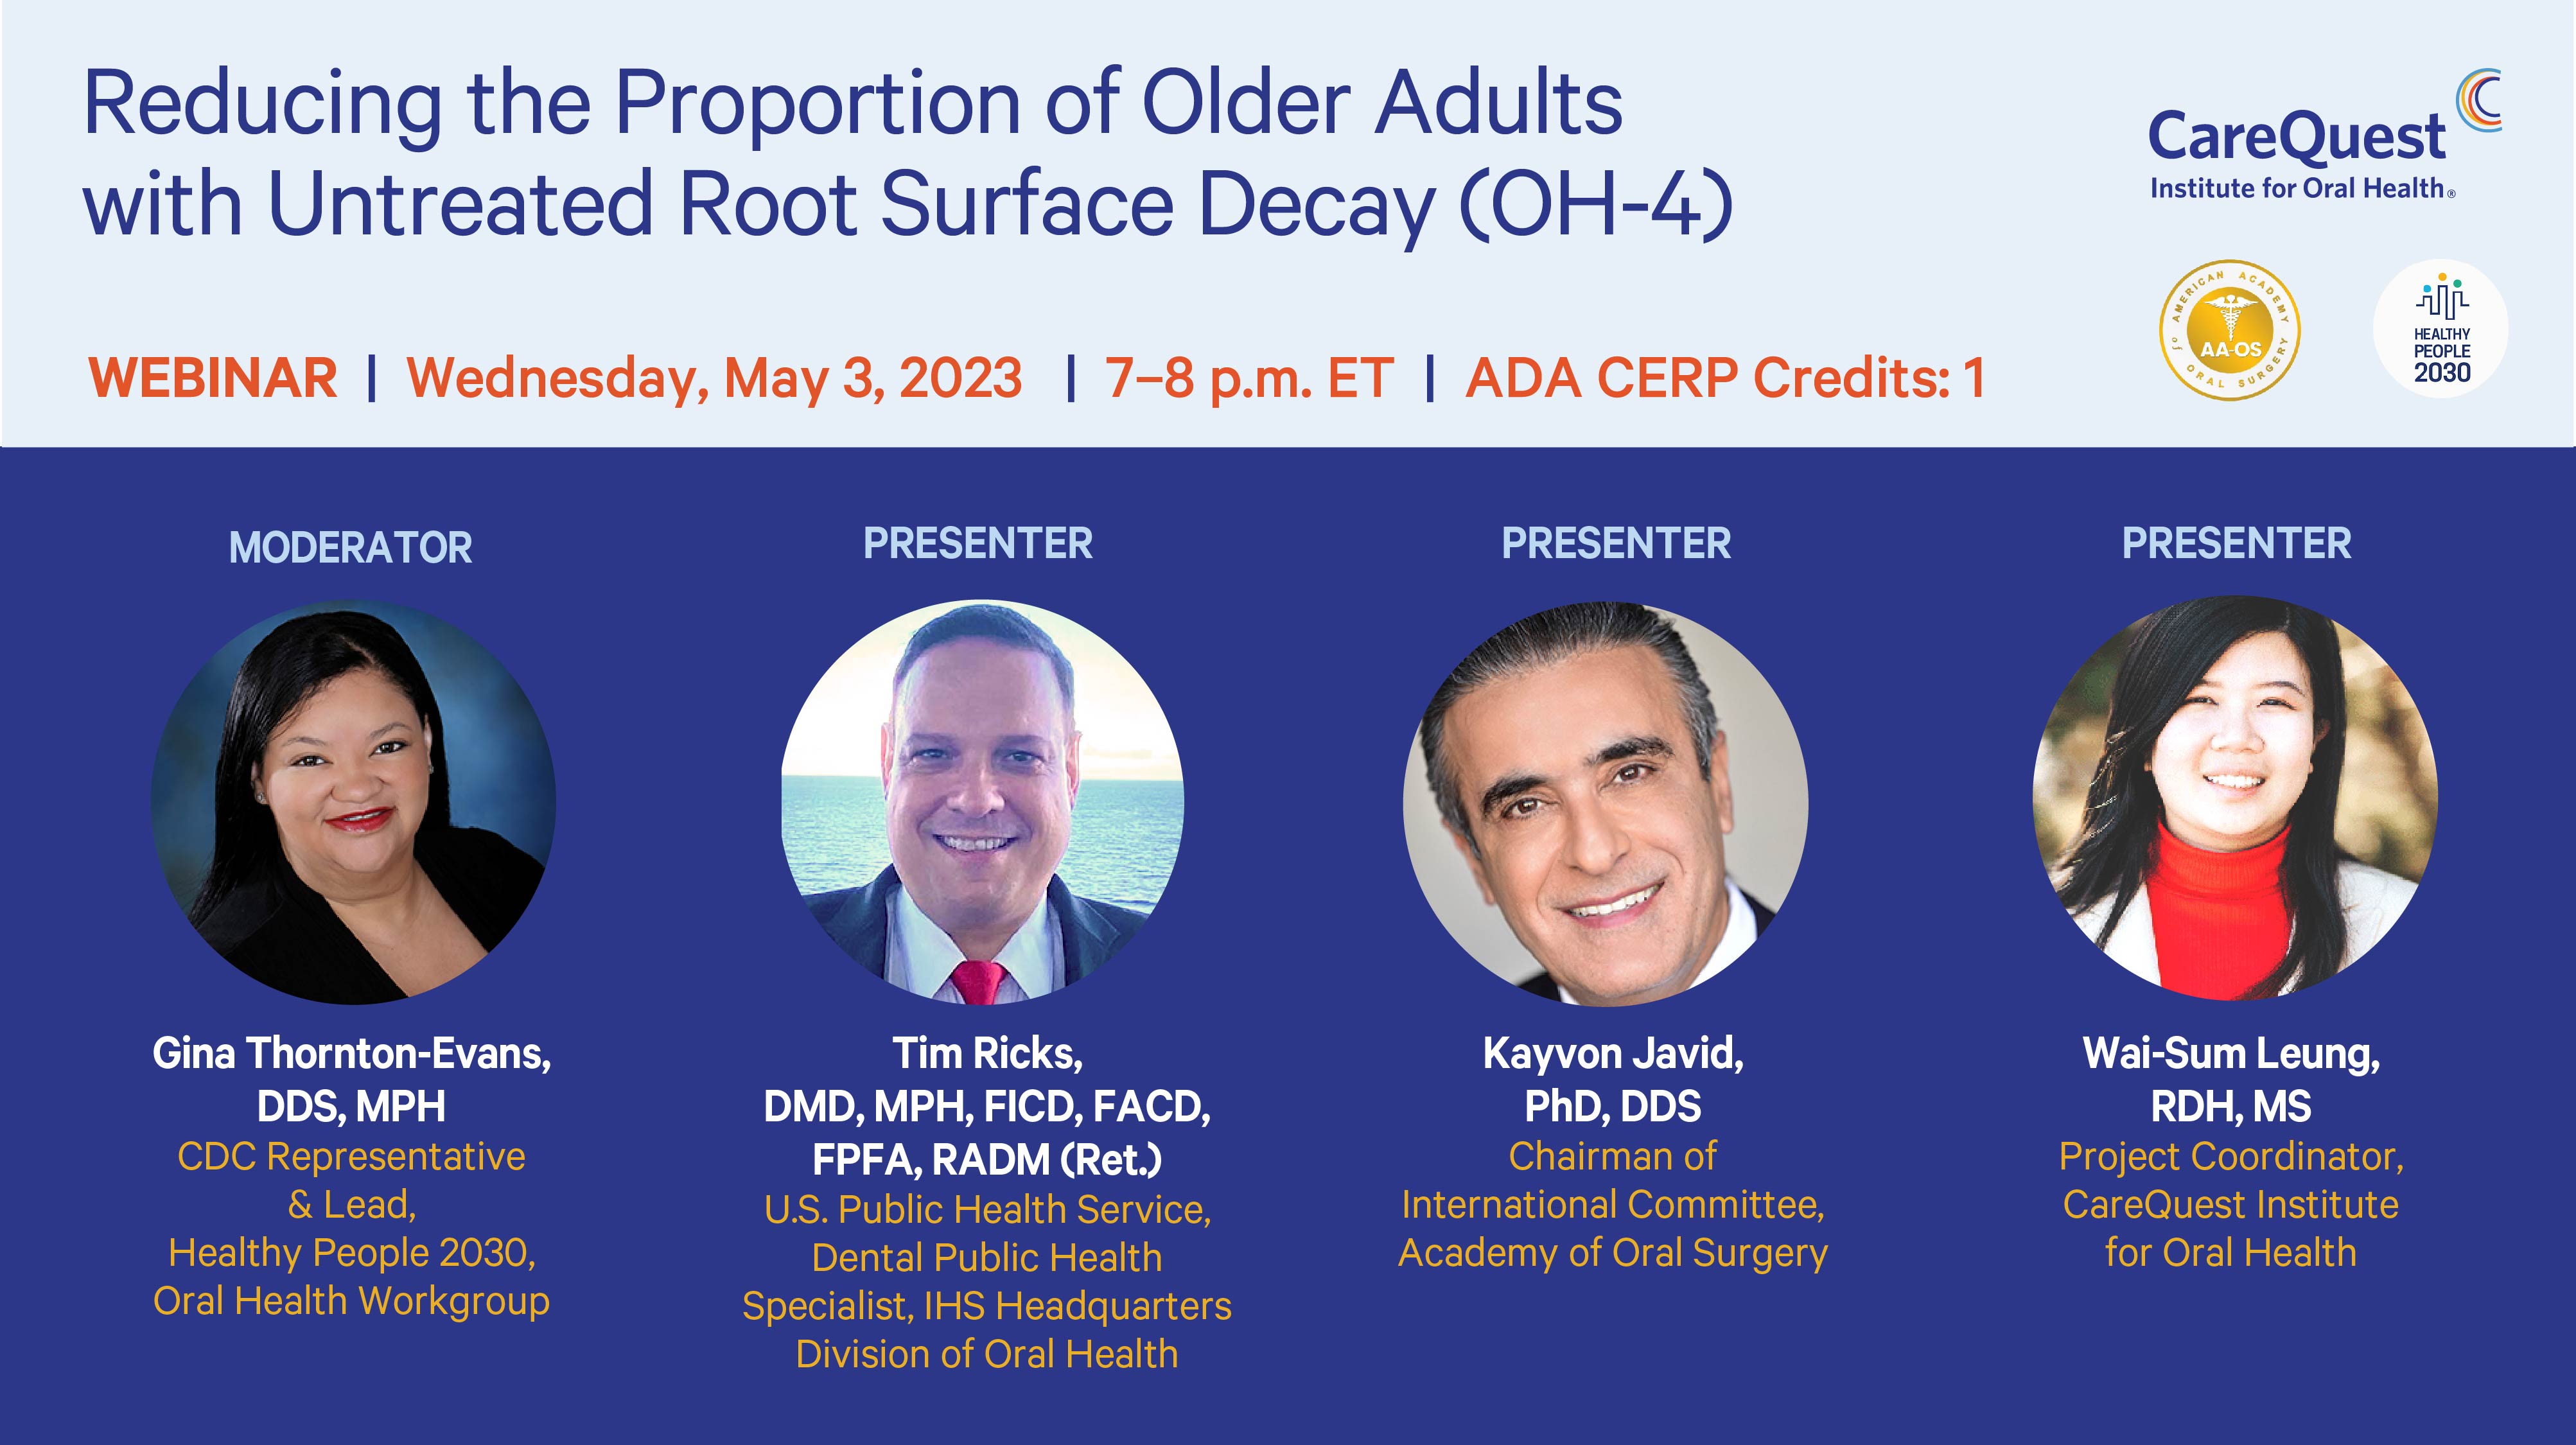 Reducing the Proportion of Older Adults with Untreated Root Surface Decay Speaker Image